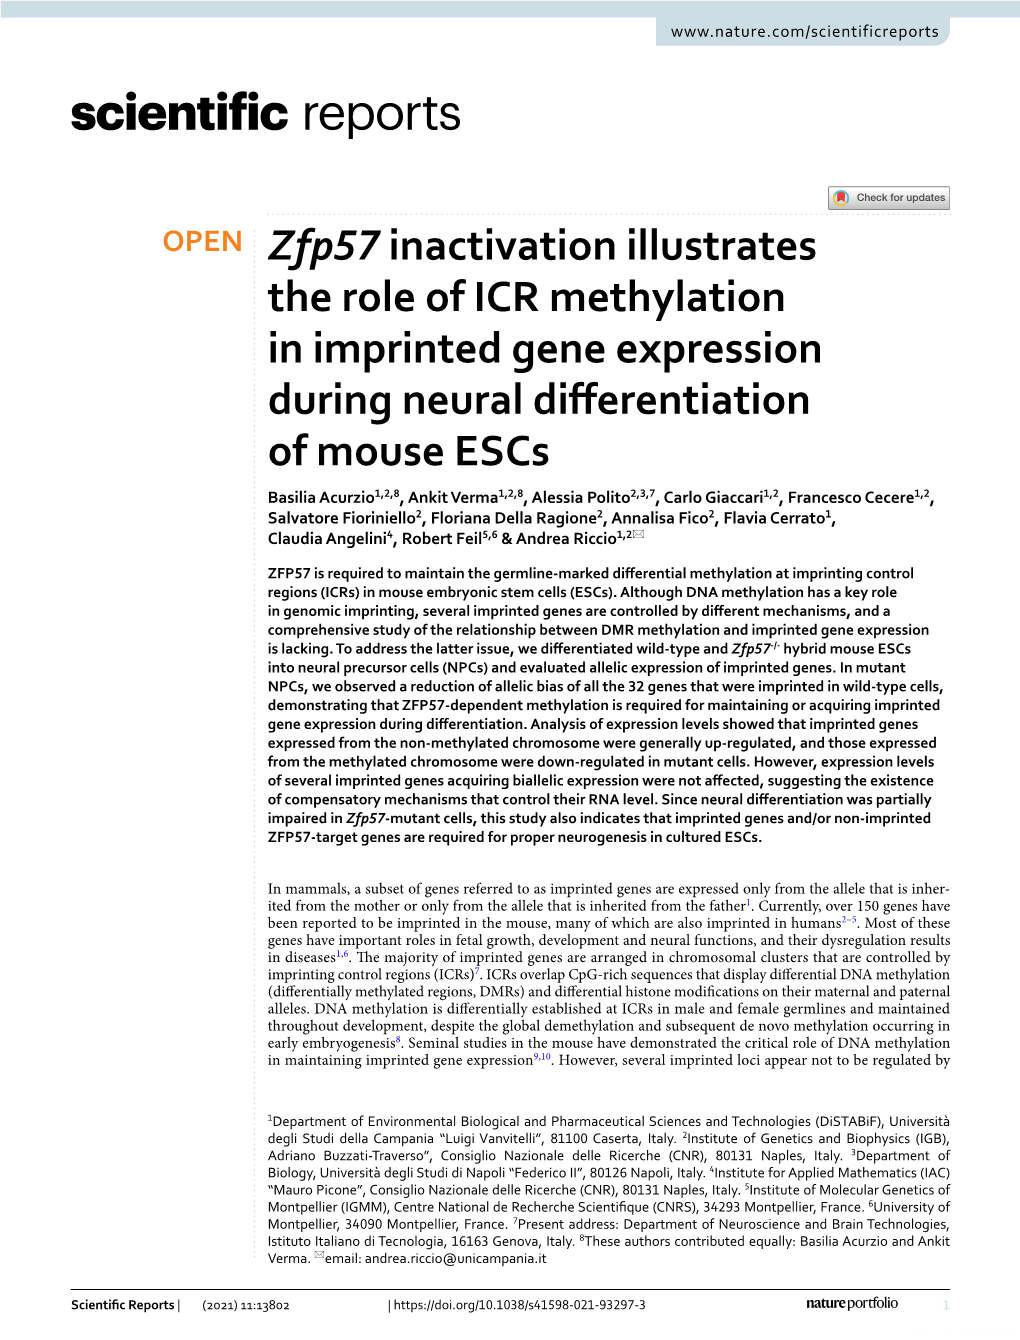 Zfp57 Inactivation Illustrates the Role of ICR Methylation in Imprinted Gene Expression During Neural Differentiation of Mouse E